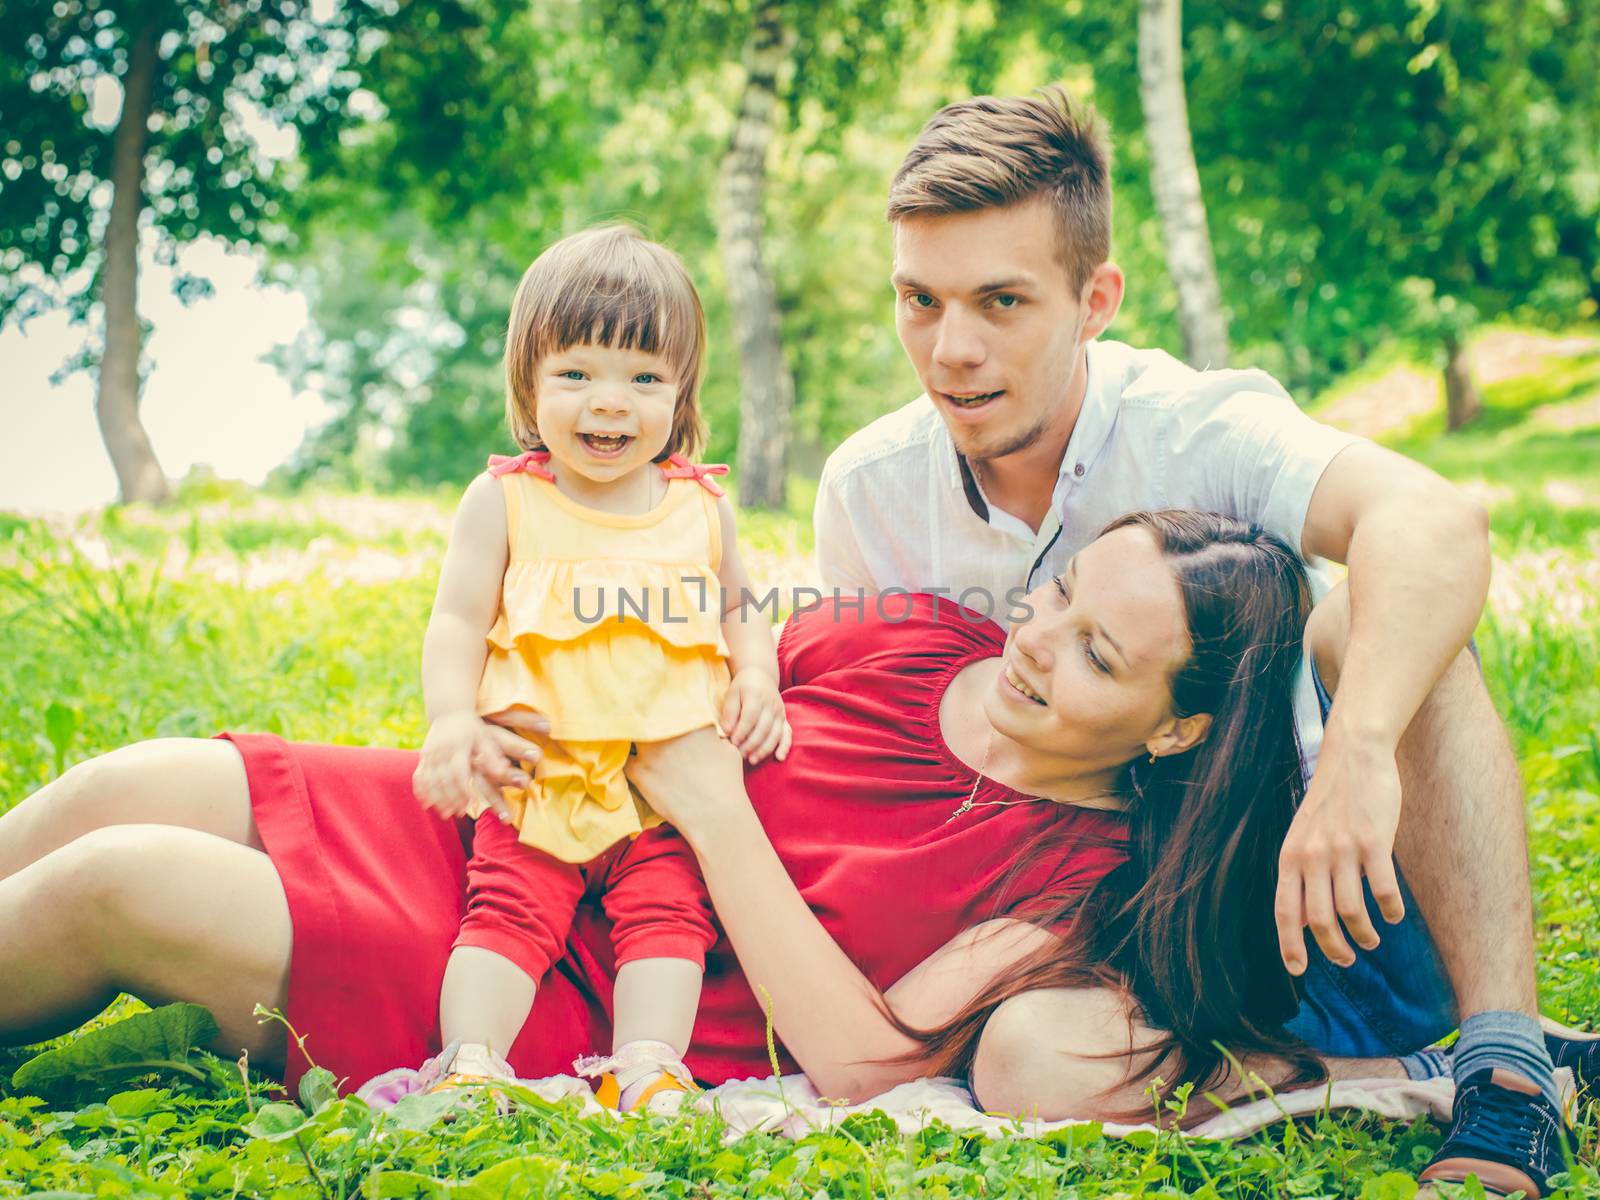 Close up family portraitoutdoors. Family with little baby having fun in summer